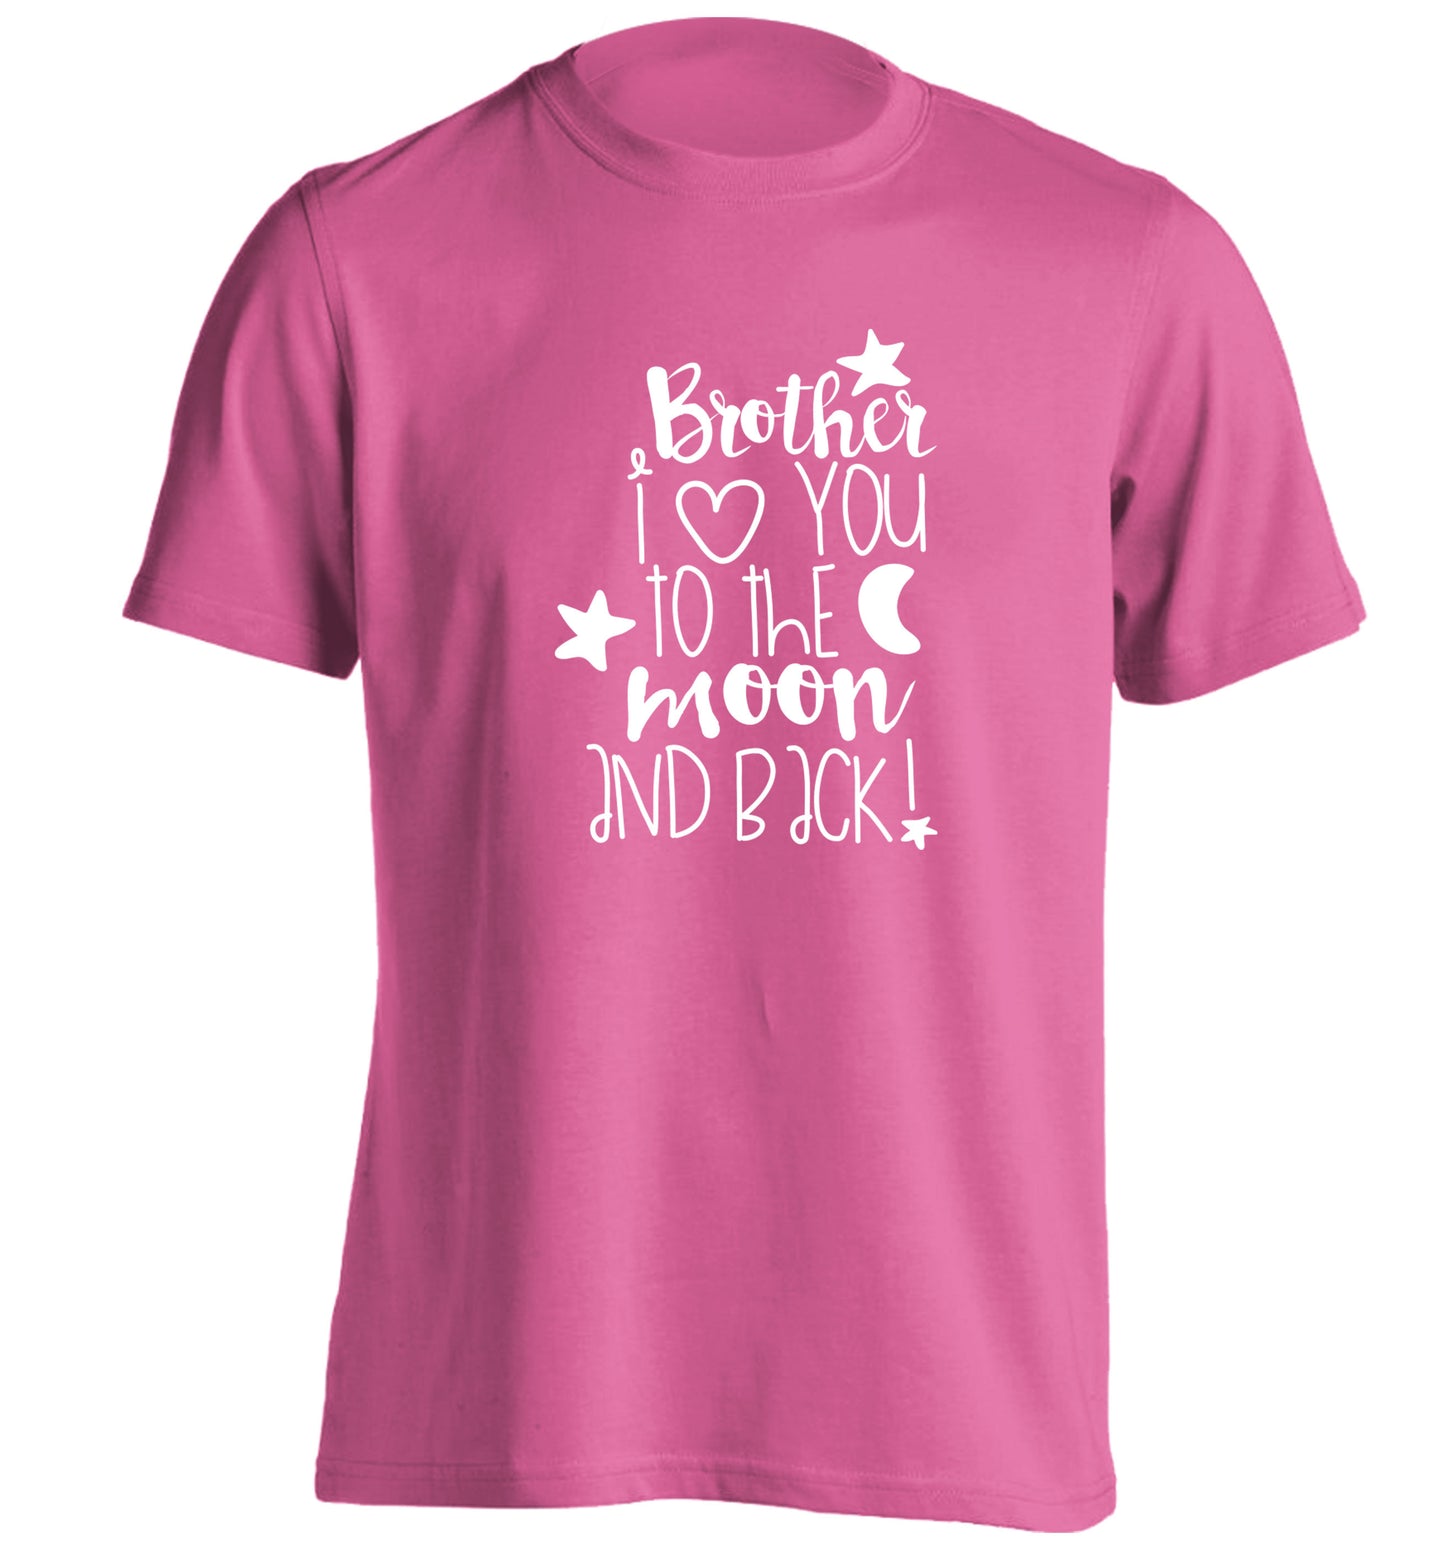 Brother I love you to the moon and back adults unisex pink Tshirt 2XL